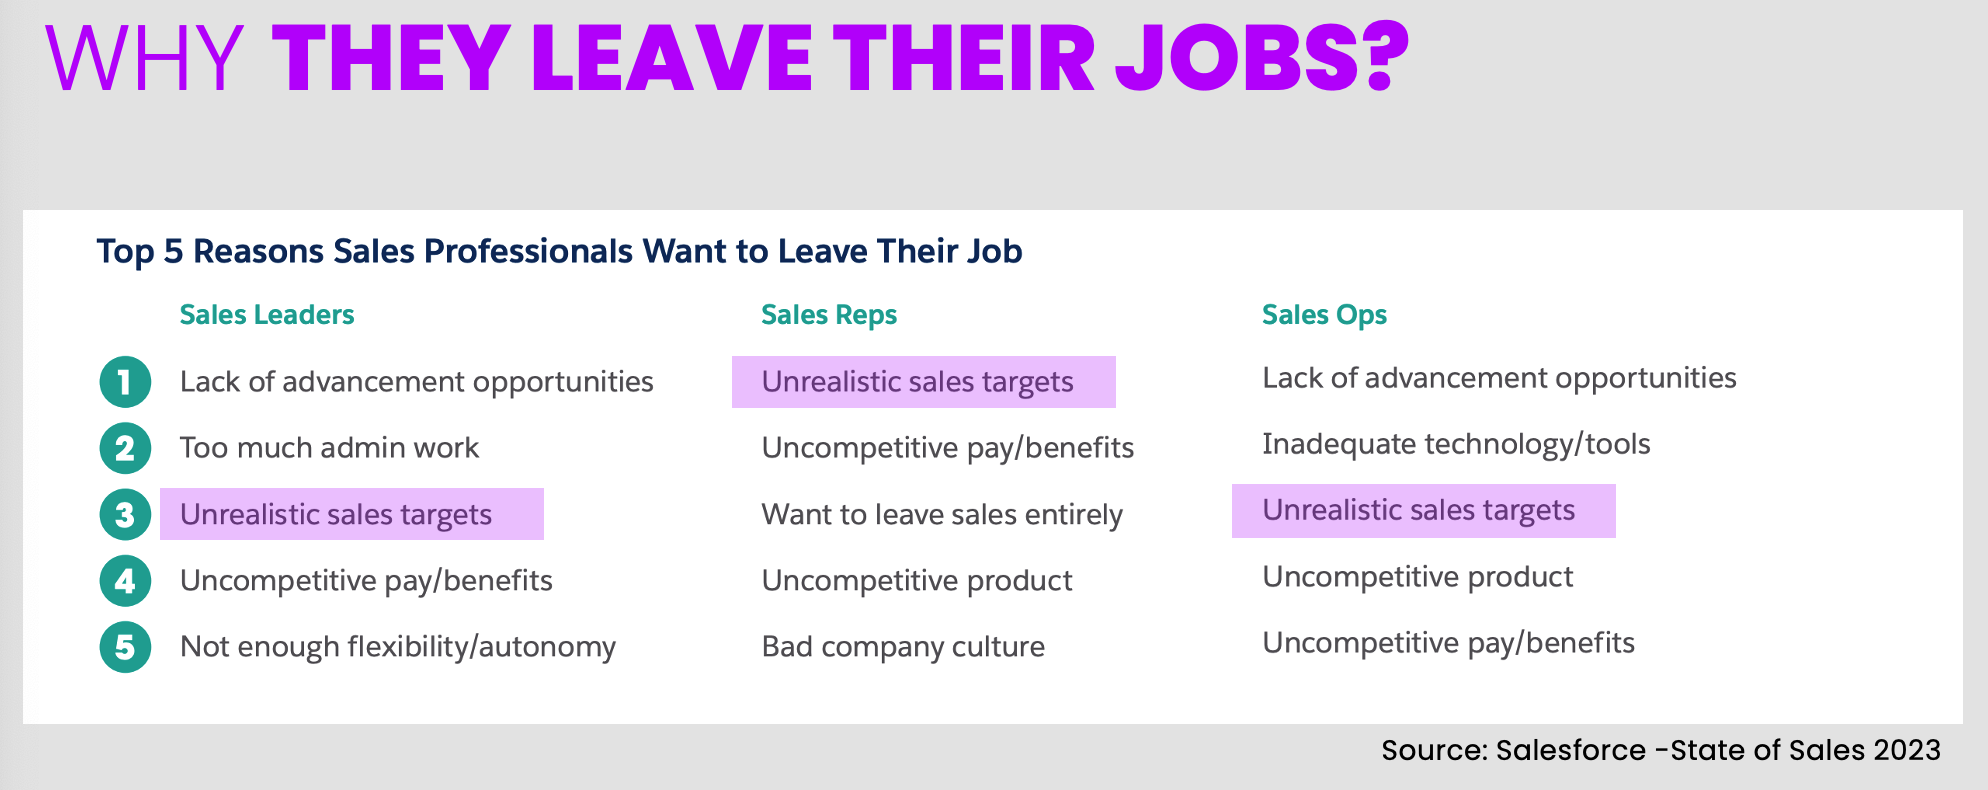 What needs to be fixed so that a company can retain salespeople and drive profitable growth